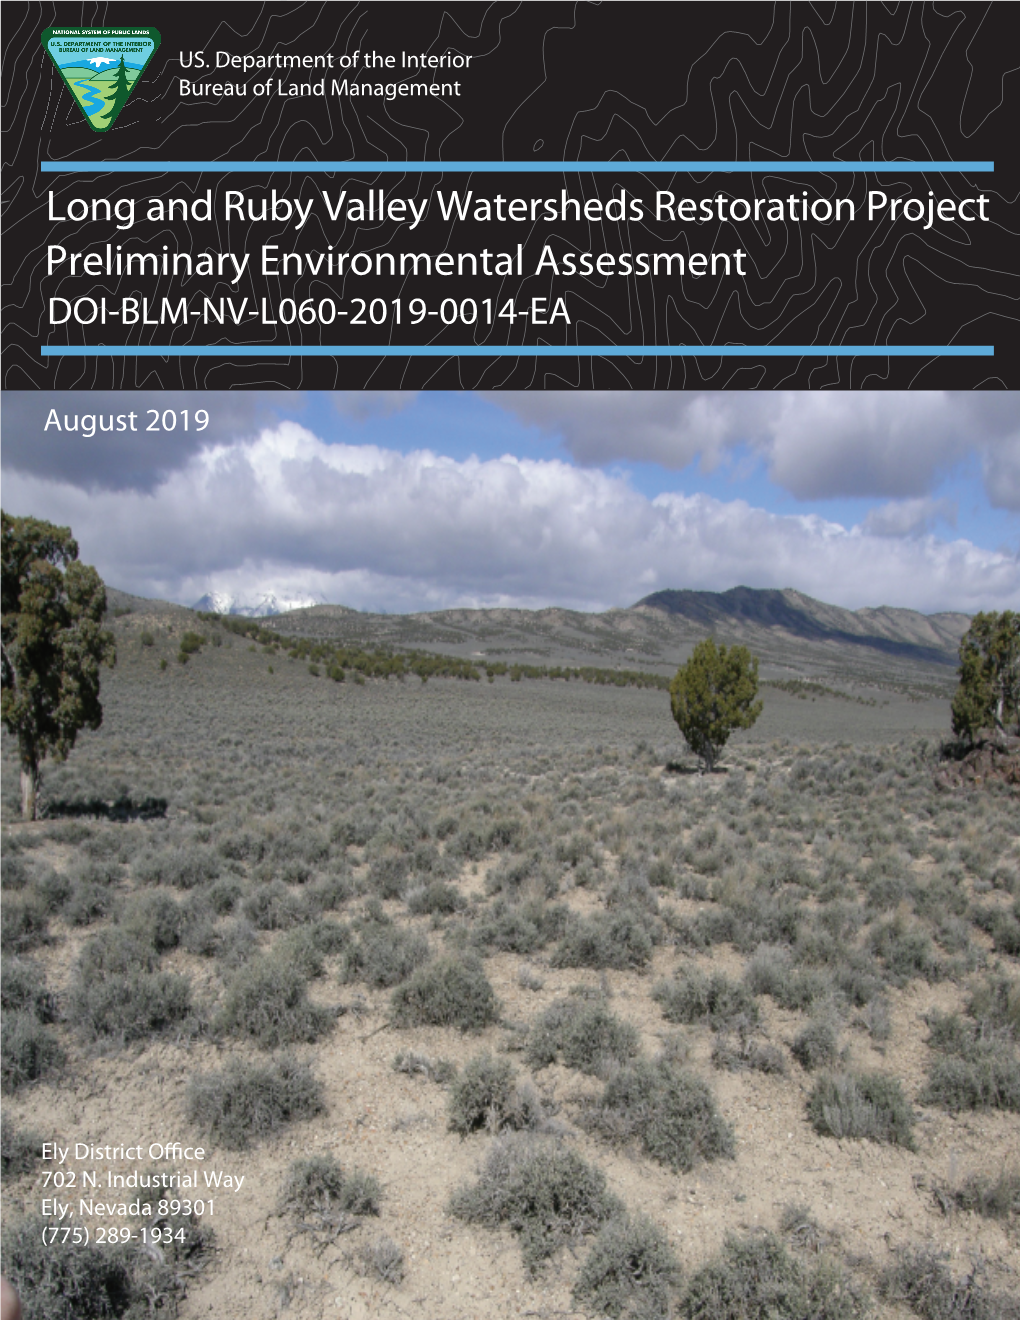 Long and Ruby Valley Watersheds Preliminary Environmental Assessment